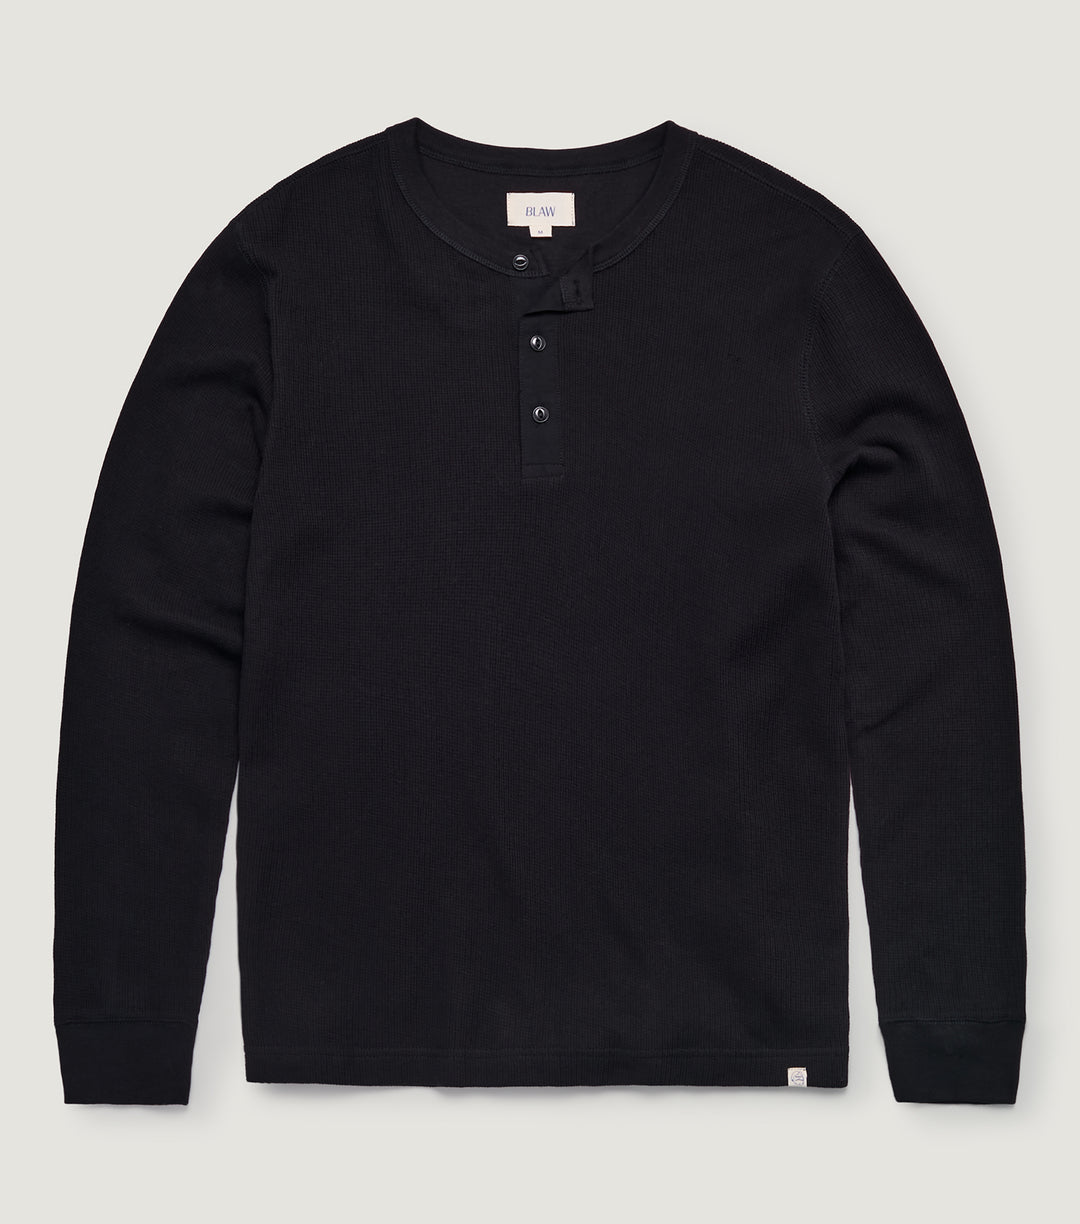 Thermal henley with long sleeves, Black - BLAW